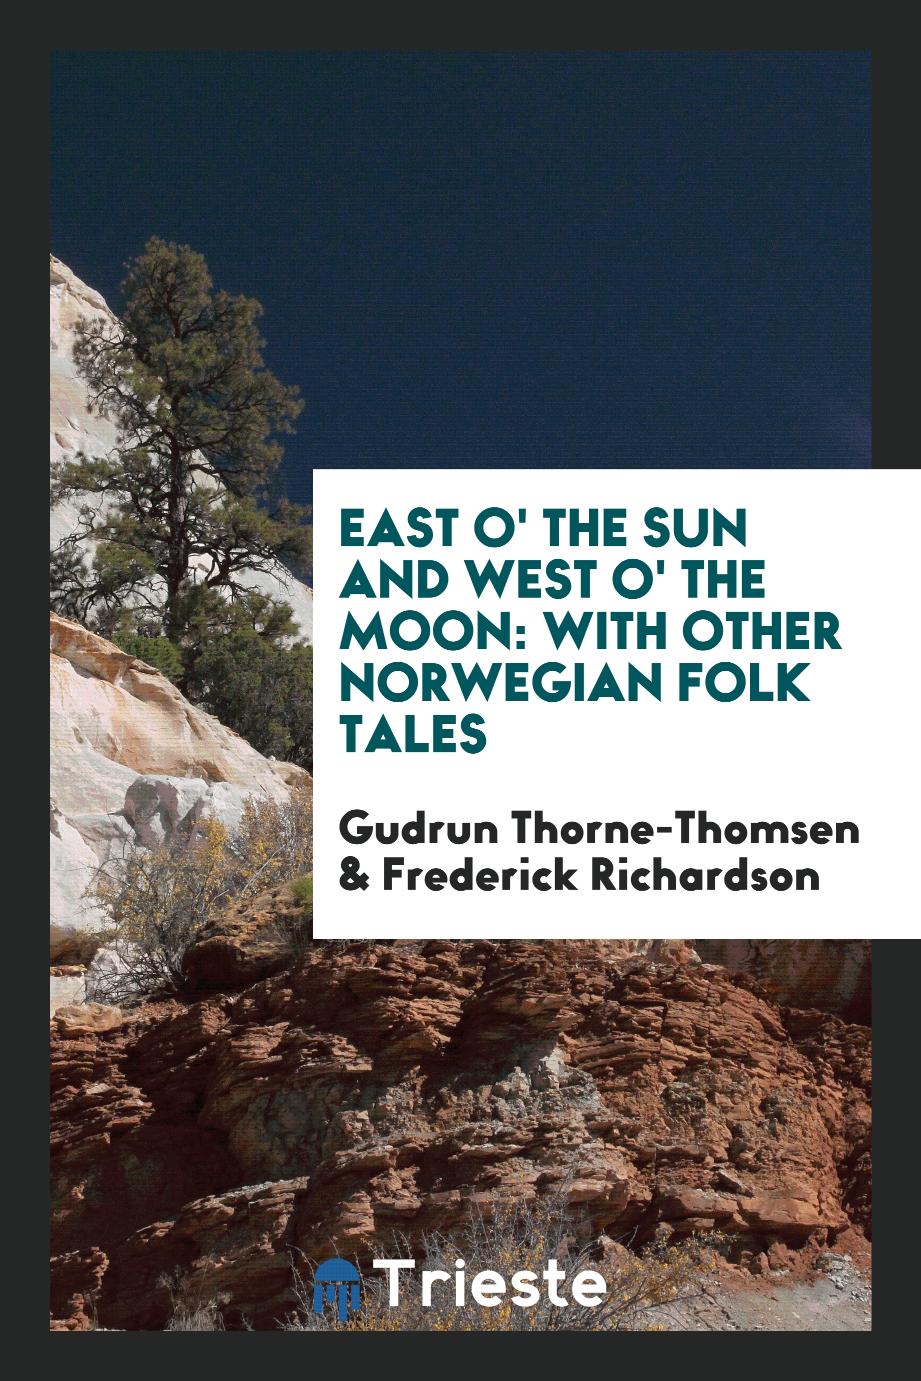 East o' the sun and west o' the moon: with other Norwegian folk tales